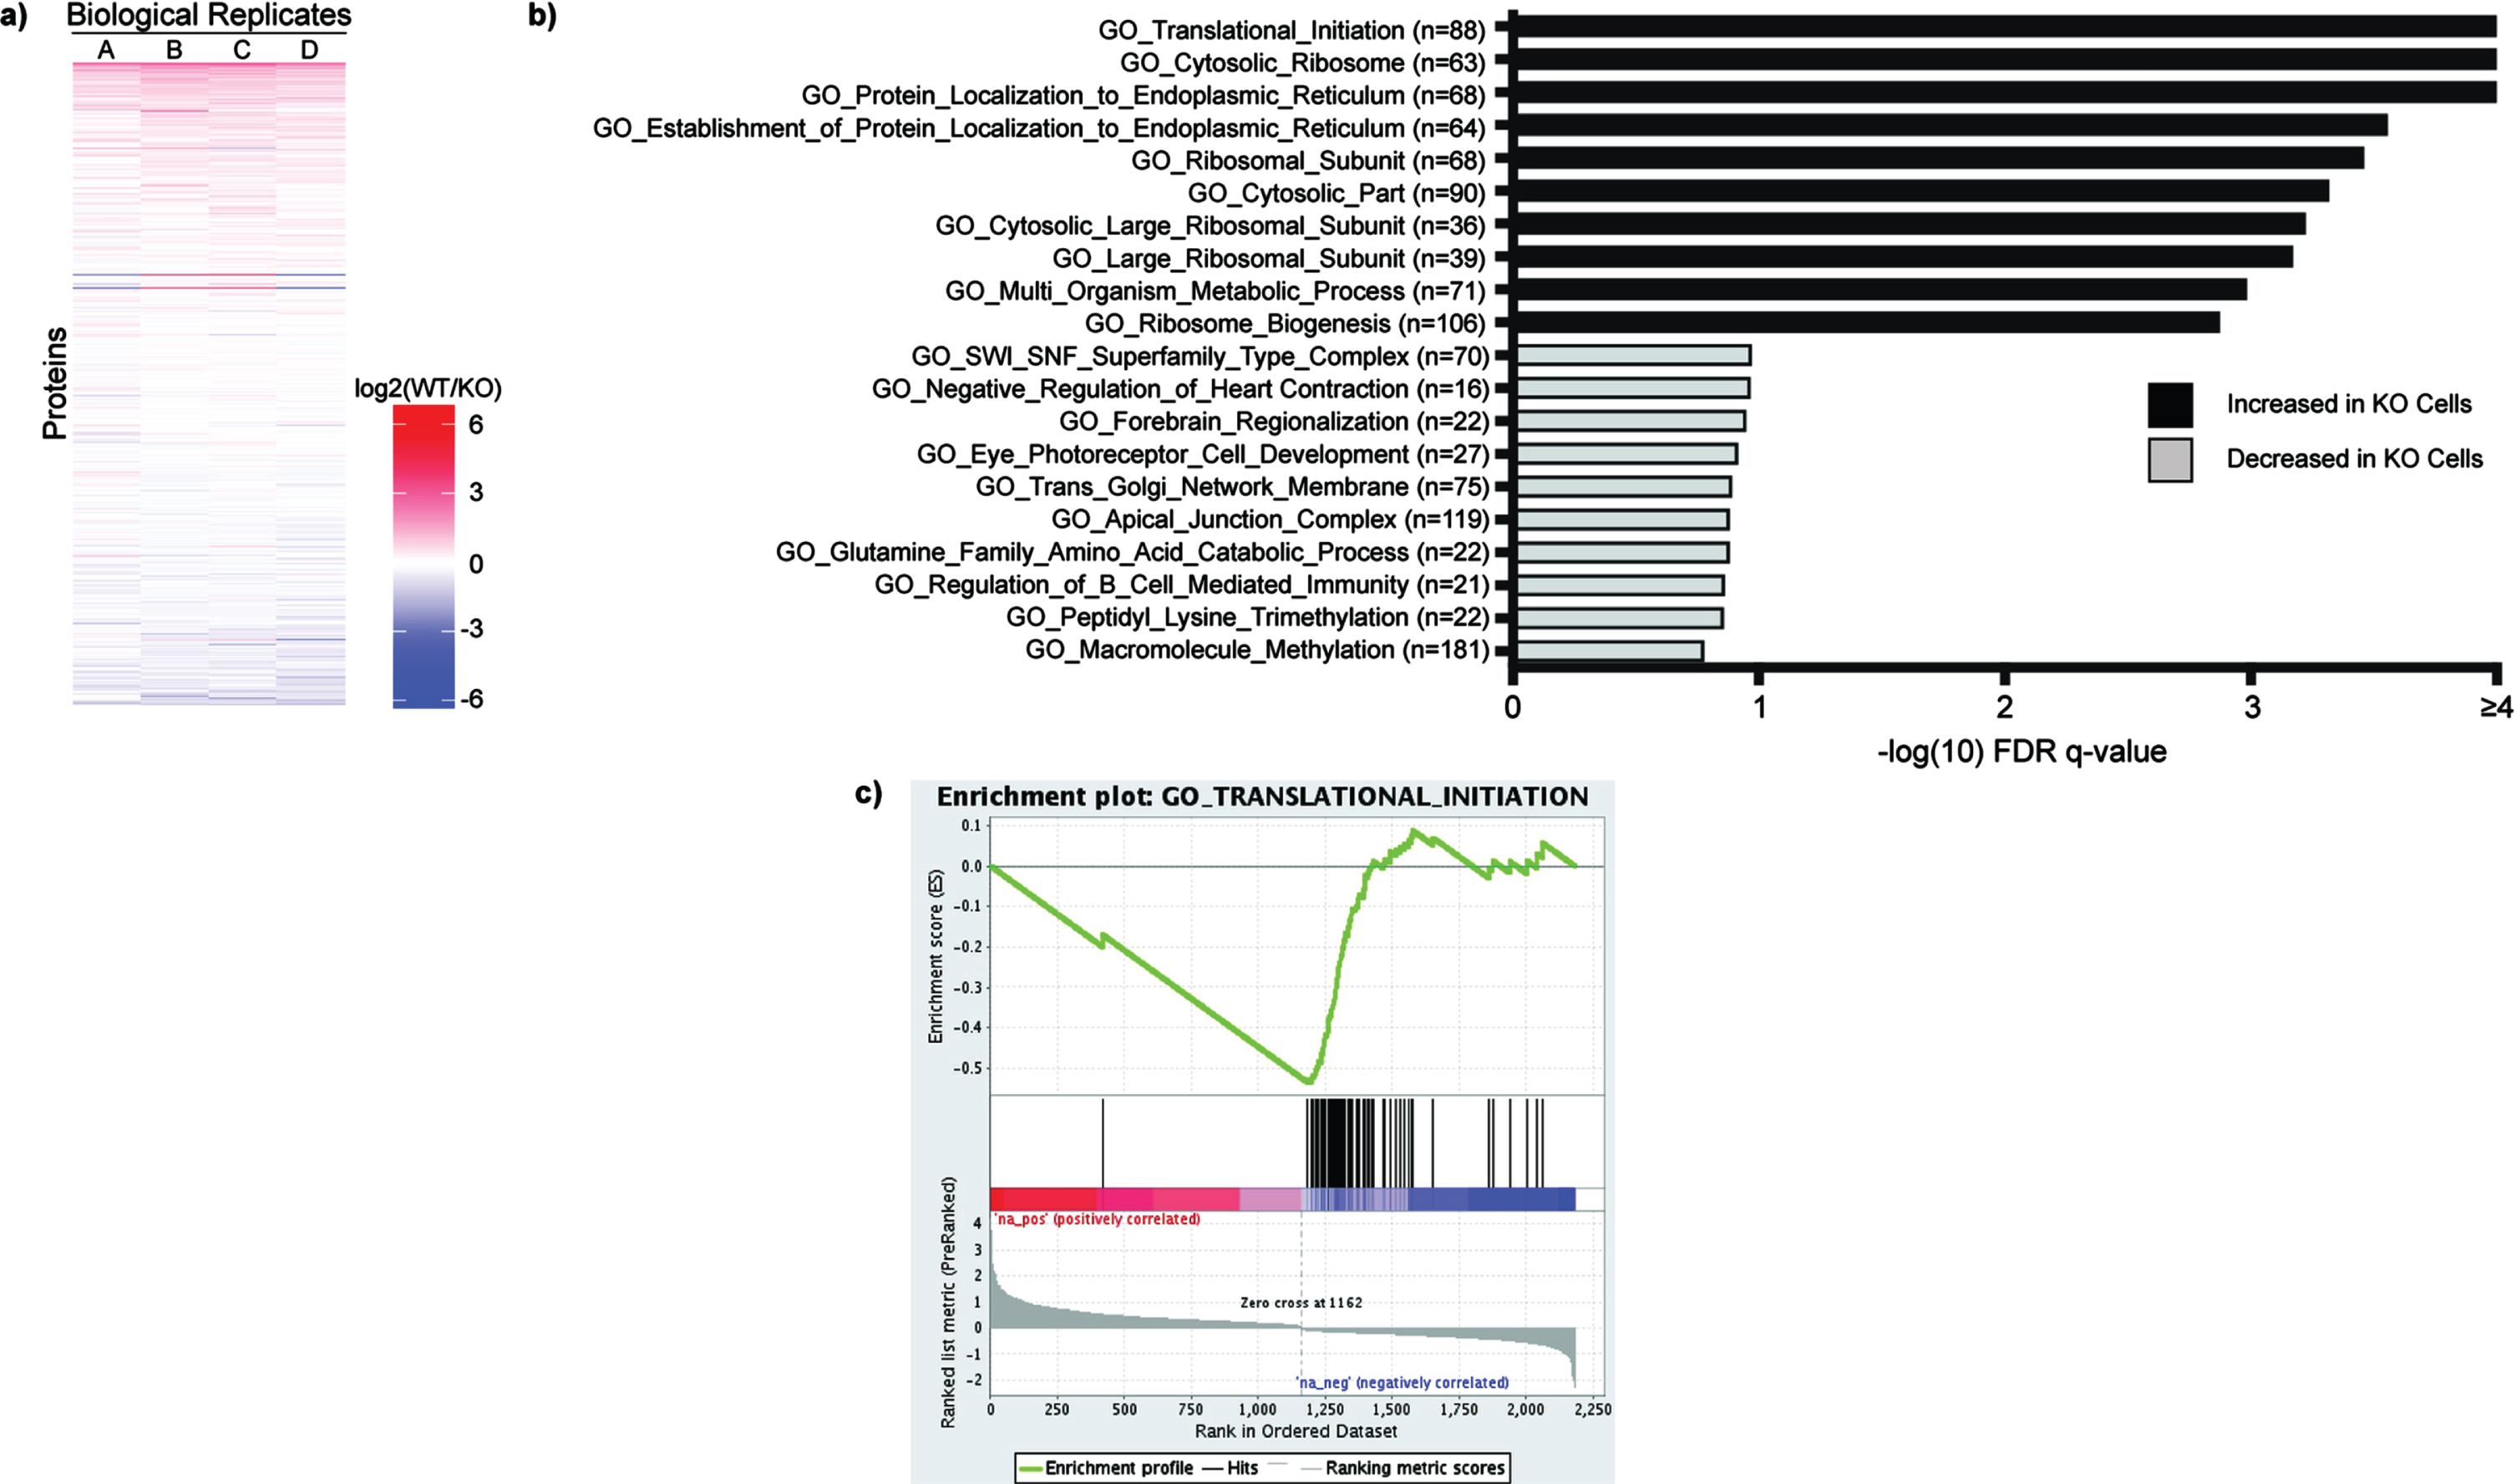 Total Proteome Analysis Demonstrates Changes in Protein Translation in SETD2-KO Cells. a) Individual proteins are up- and down-regulated in WT versus SETD2-KO HKC cell lines. WT/KO protein ratios are ranked and evaluated for Gene Set Enrichment Analysis (GSEA) using the Gene Ontology datasets. Gene sets with an FDR q-value <  0.25 were considered to be significant (-log10 = 0.60). b) Displayed are the ten most significant gene sets that are increased and decreased in SETD2-KO cells relative to wild type cells. c) The Gene Ontology signature with the lowest FDR q-value is GO_Translational_Initiation, which demonstrates increased levels of several proteins involved in protein translation in the SETD2-KO cell lines.